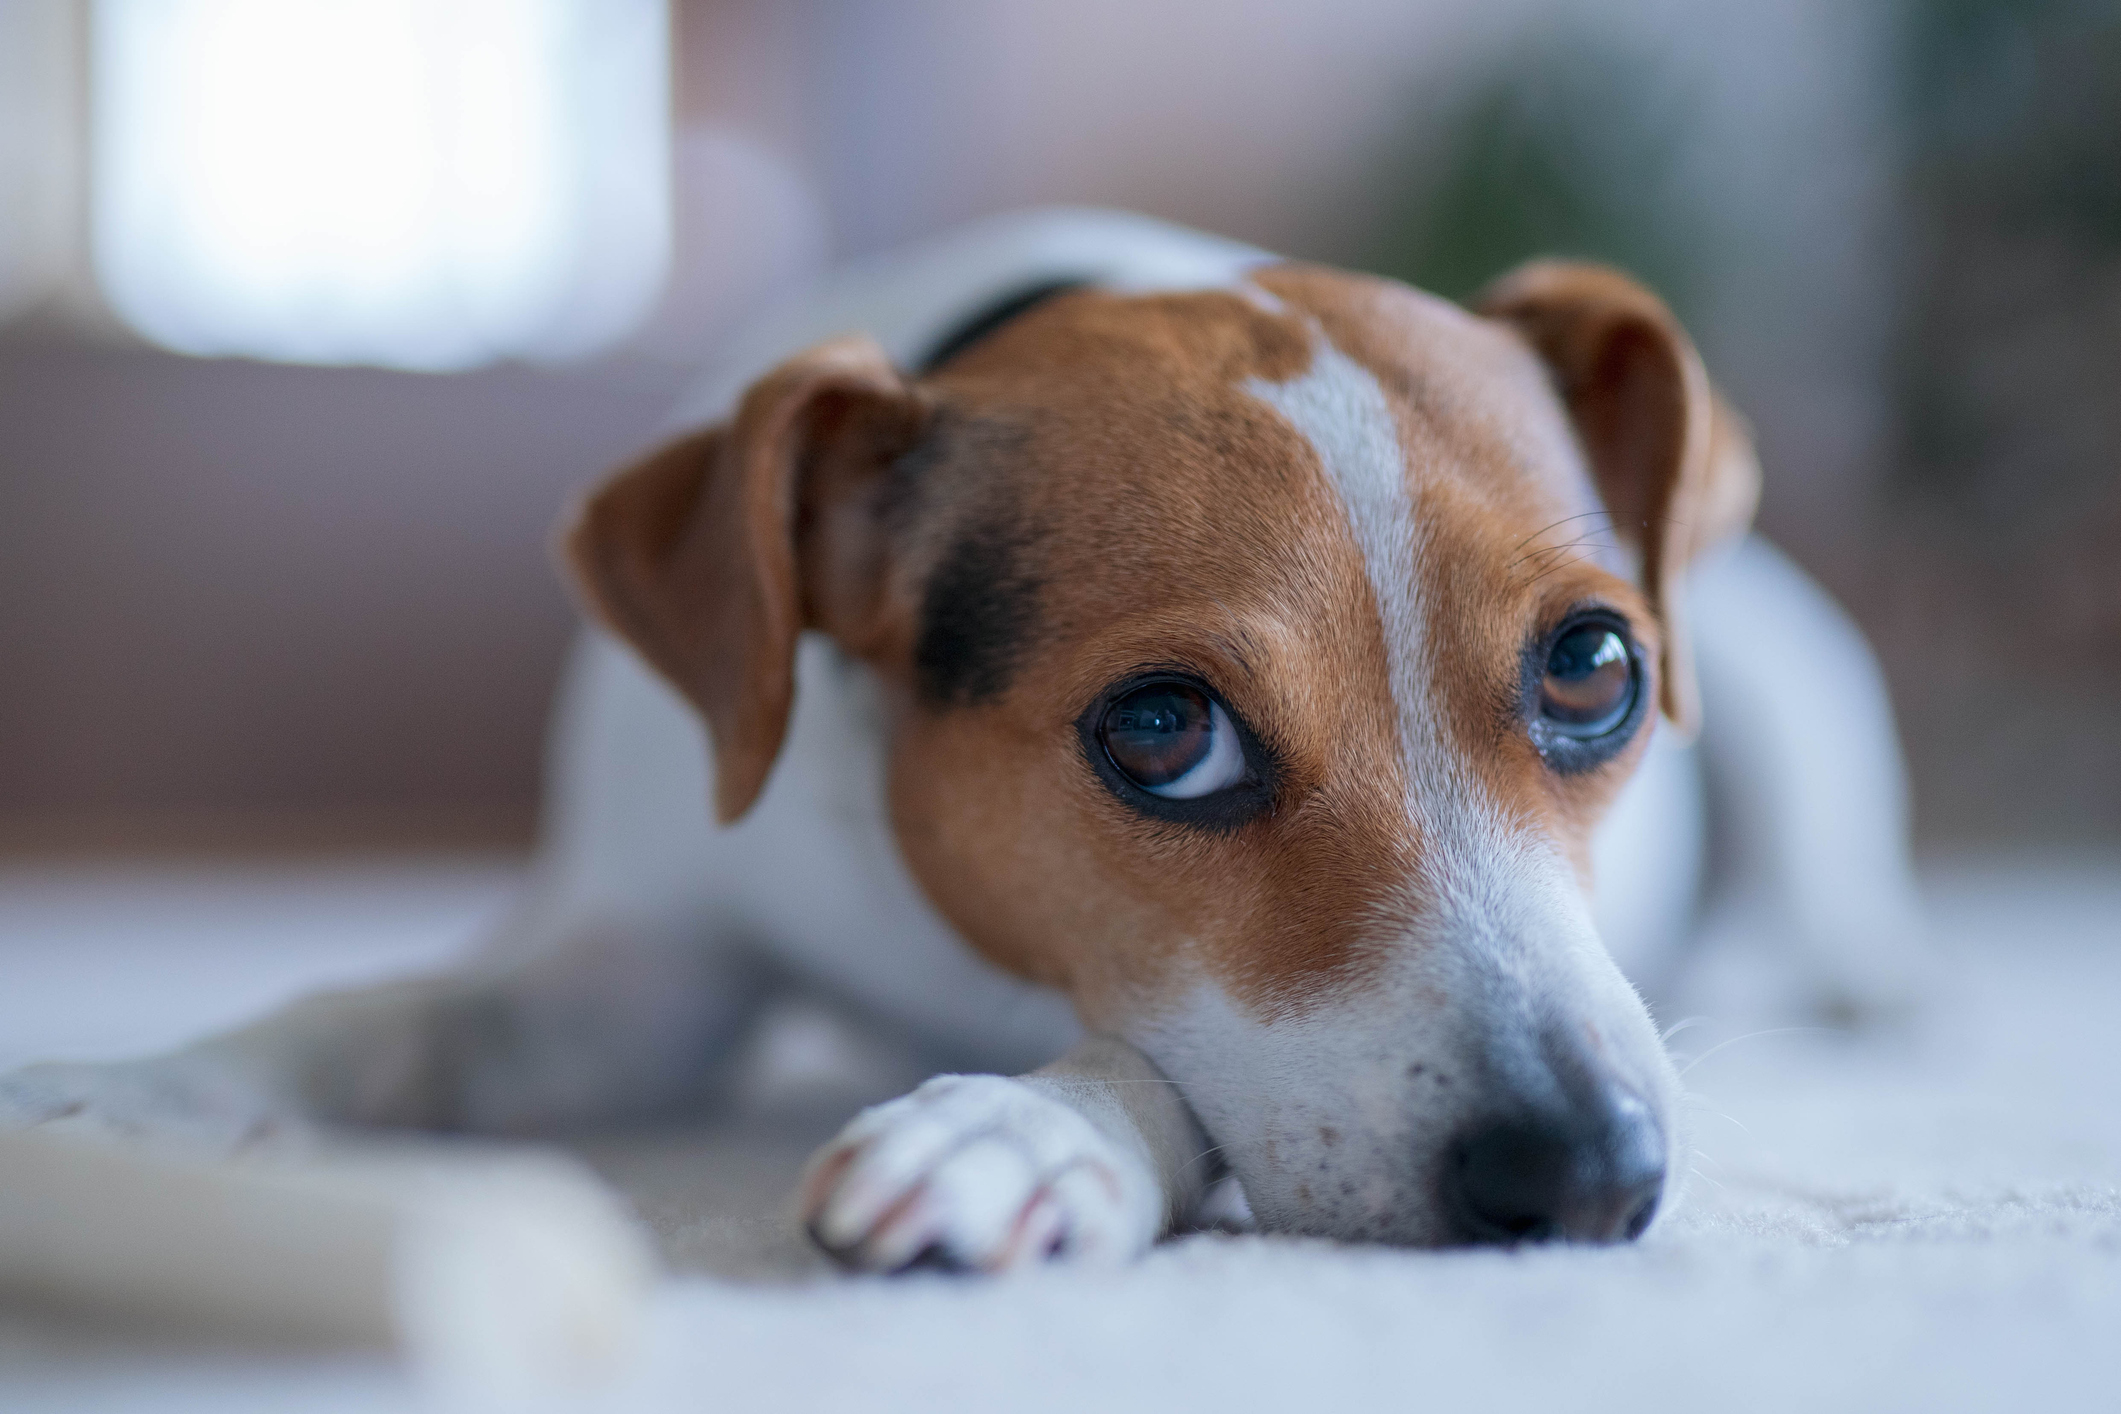 Jack Russell Terrier lying down with a contemplative expression